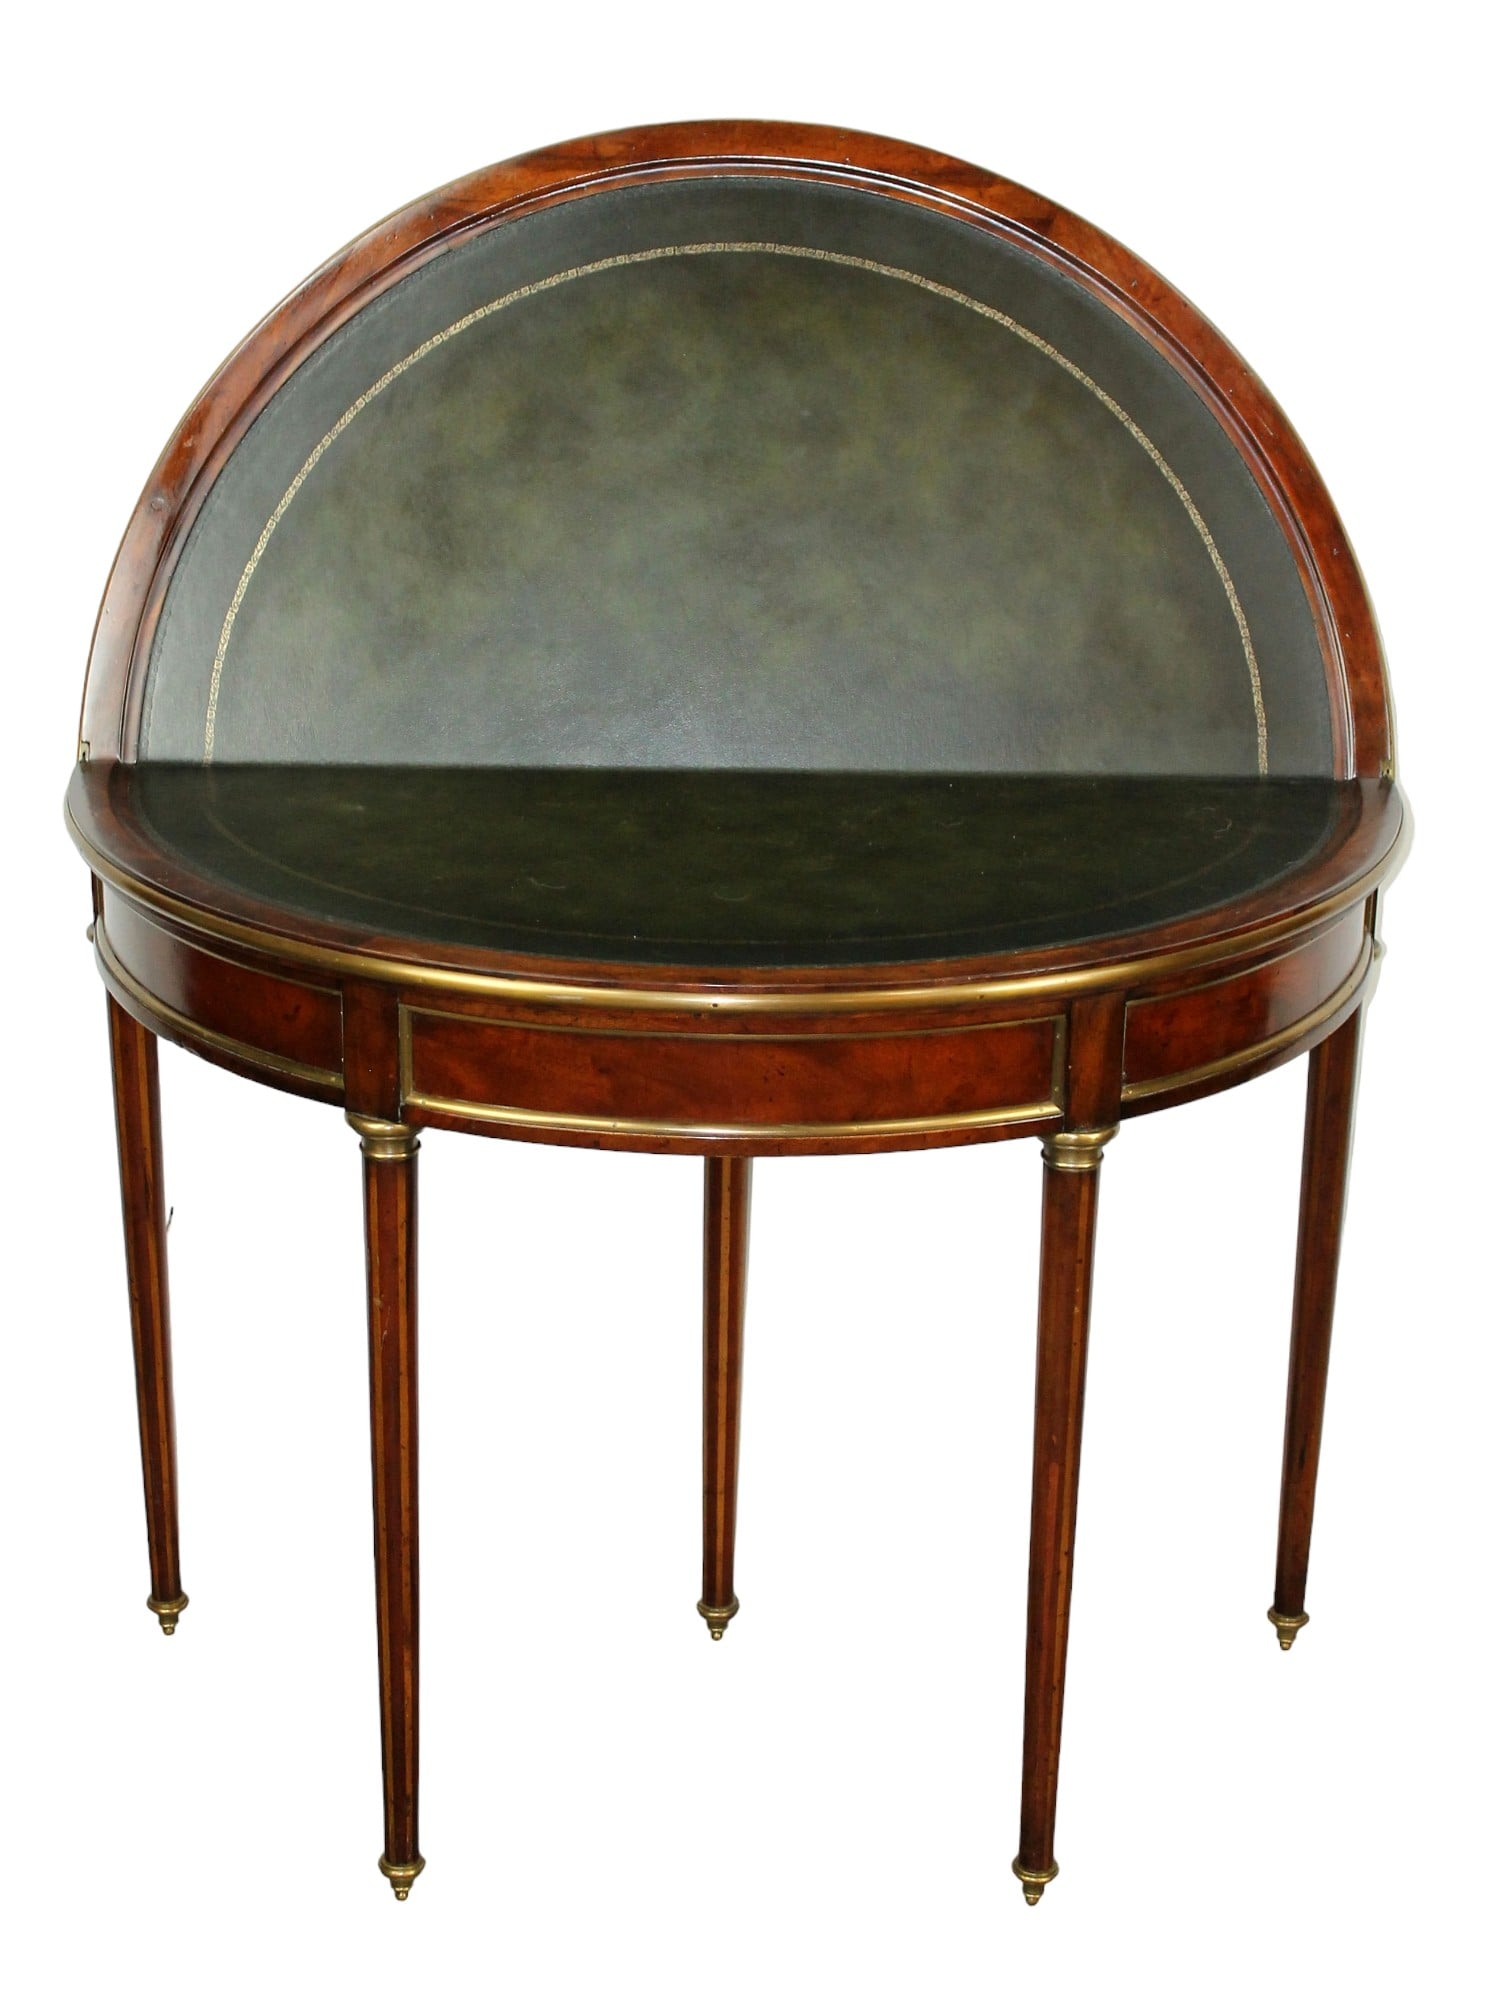 EJ Victor demi lune flip top game table